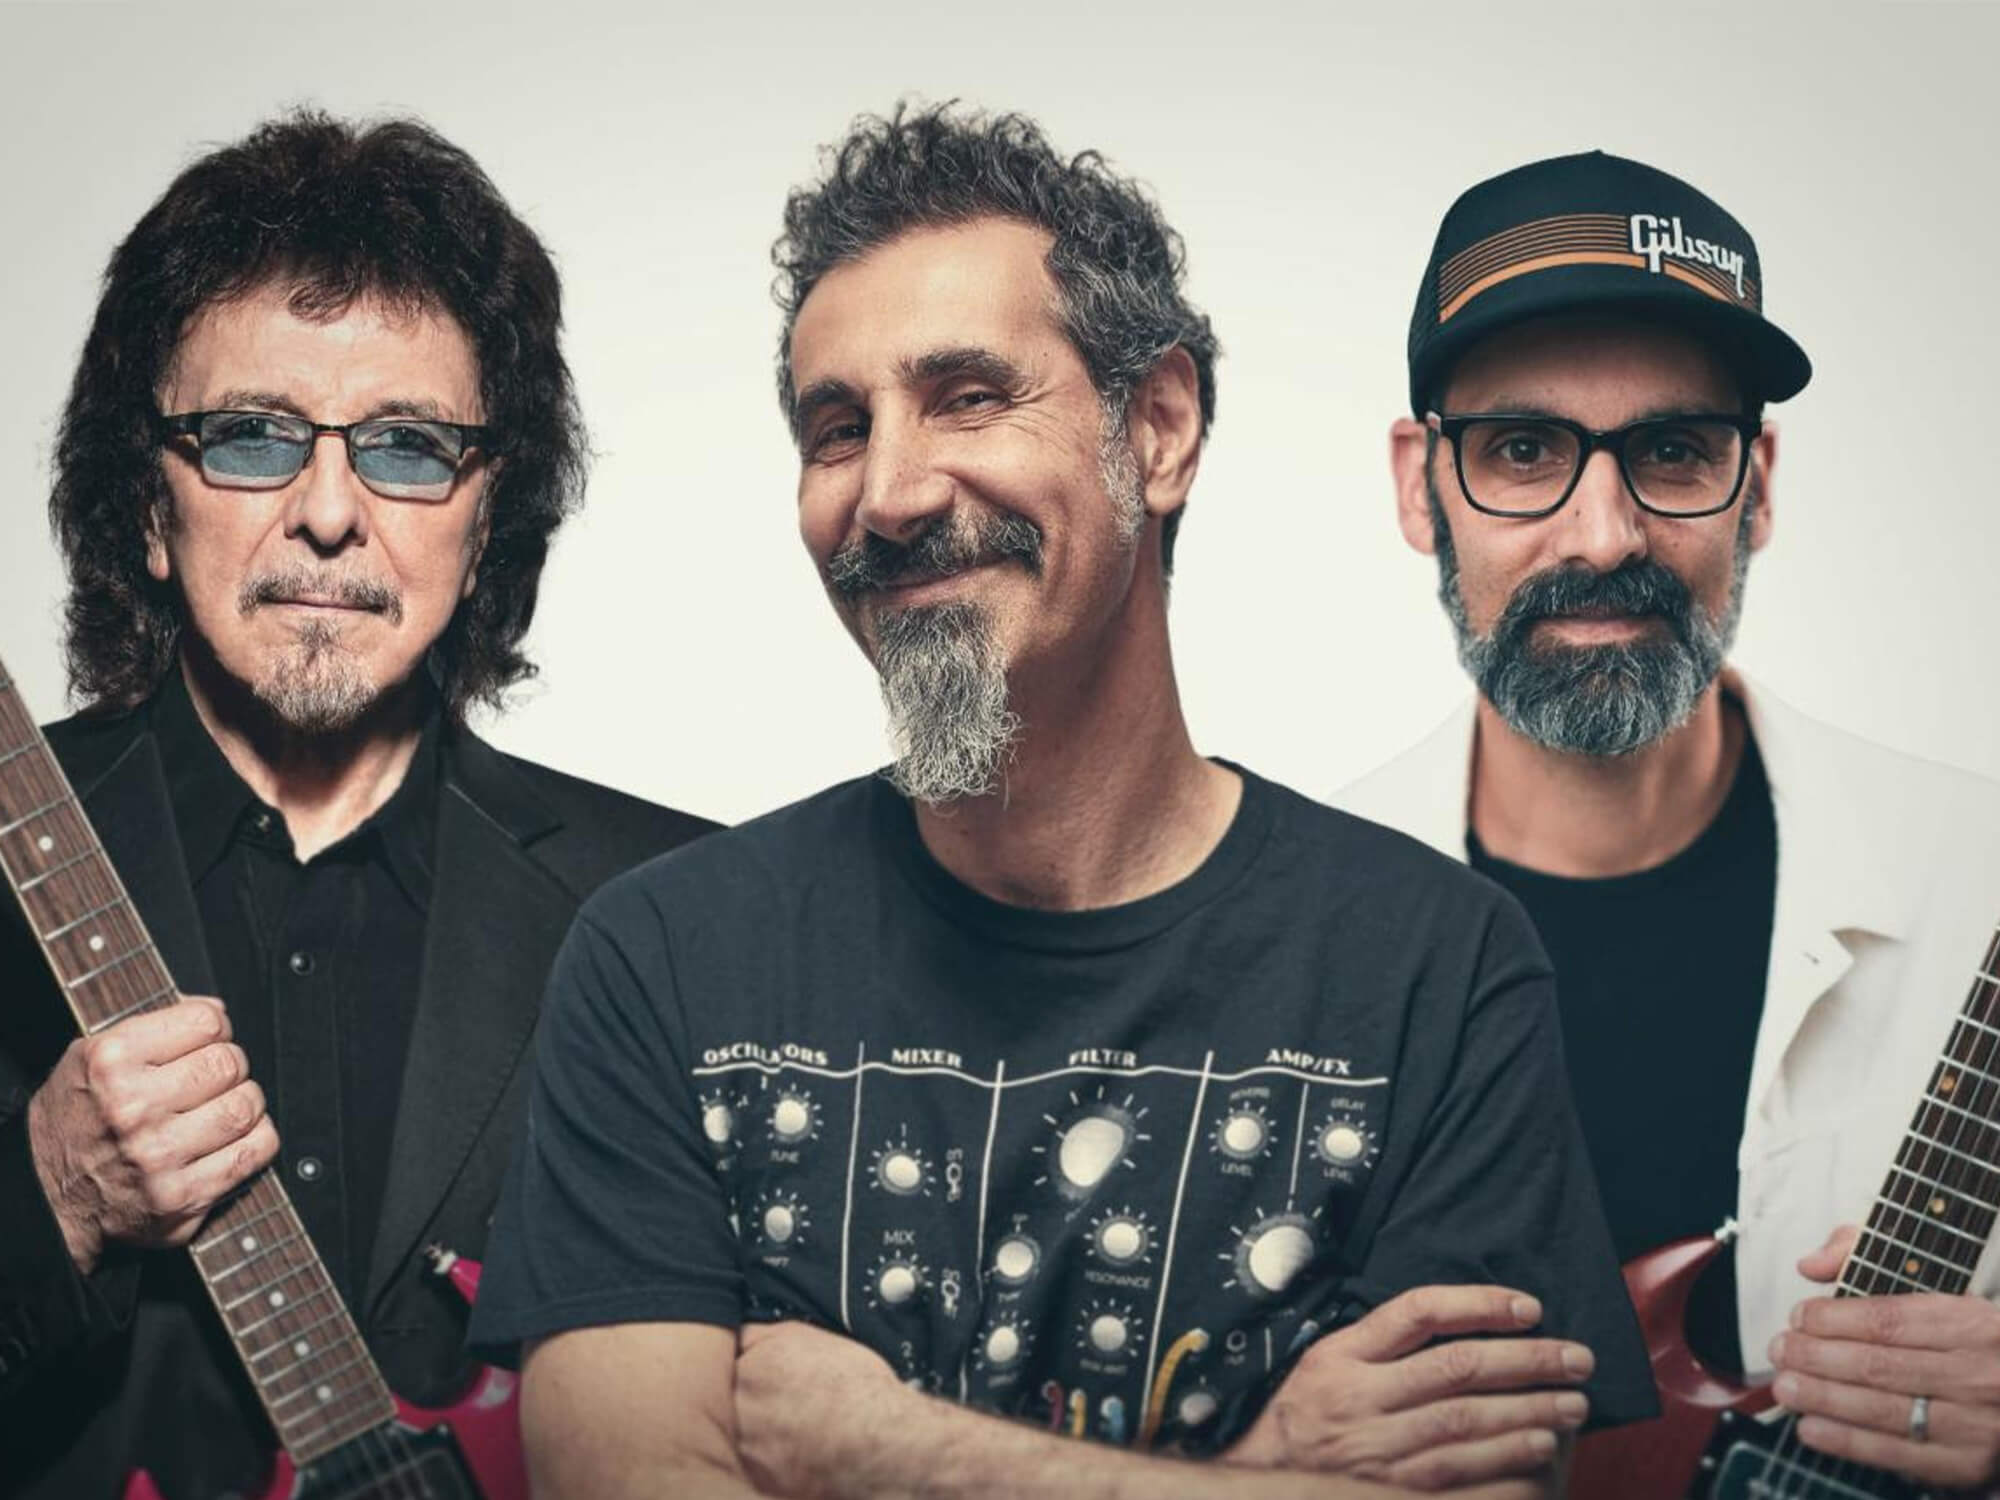 Tony Iommi, Serj Tankian, and Cesar Gueikian. Serj is smiling with his arms folded, while Cesar and Tony are holding their guitars behind him.